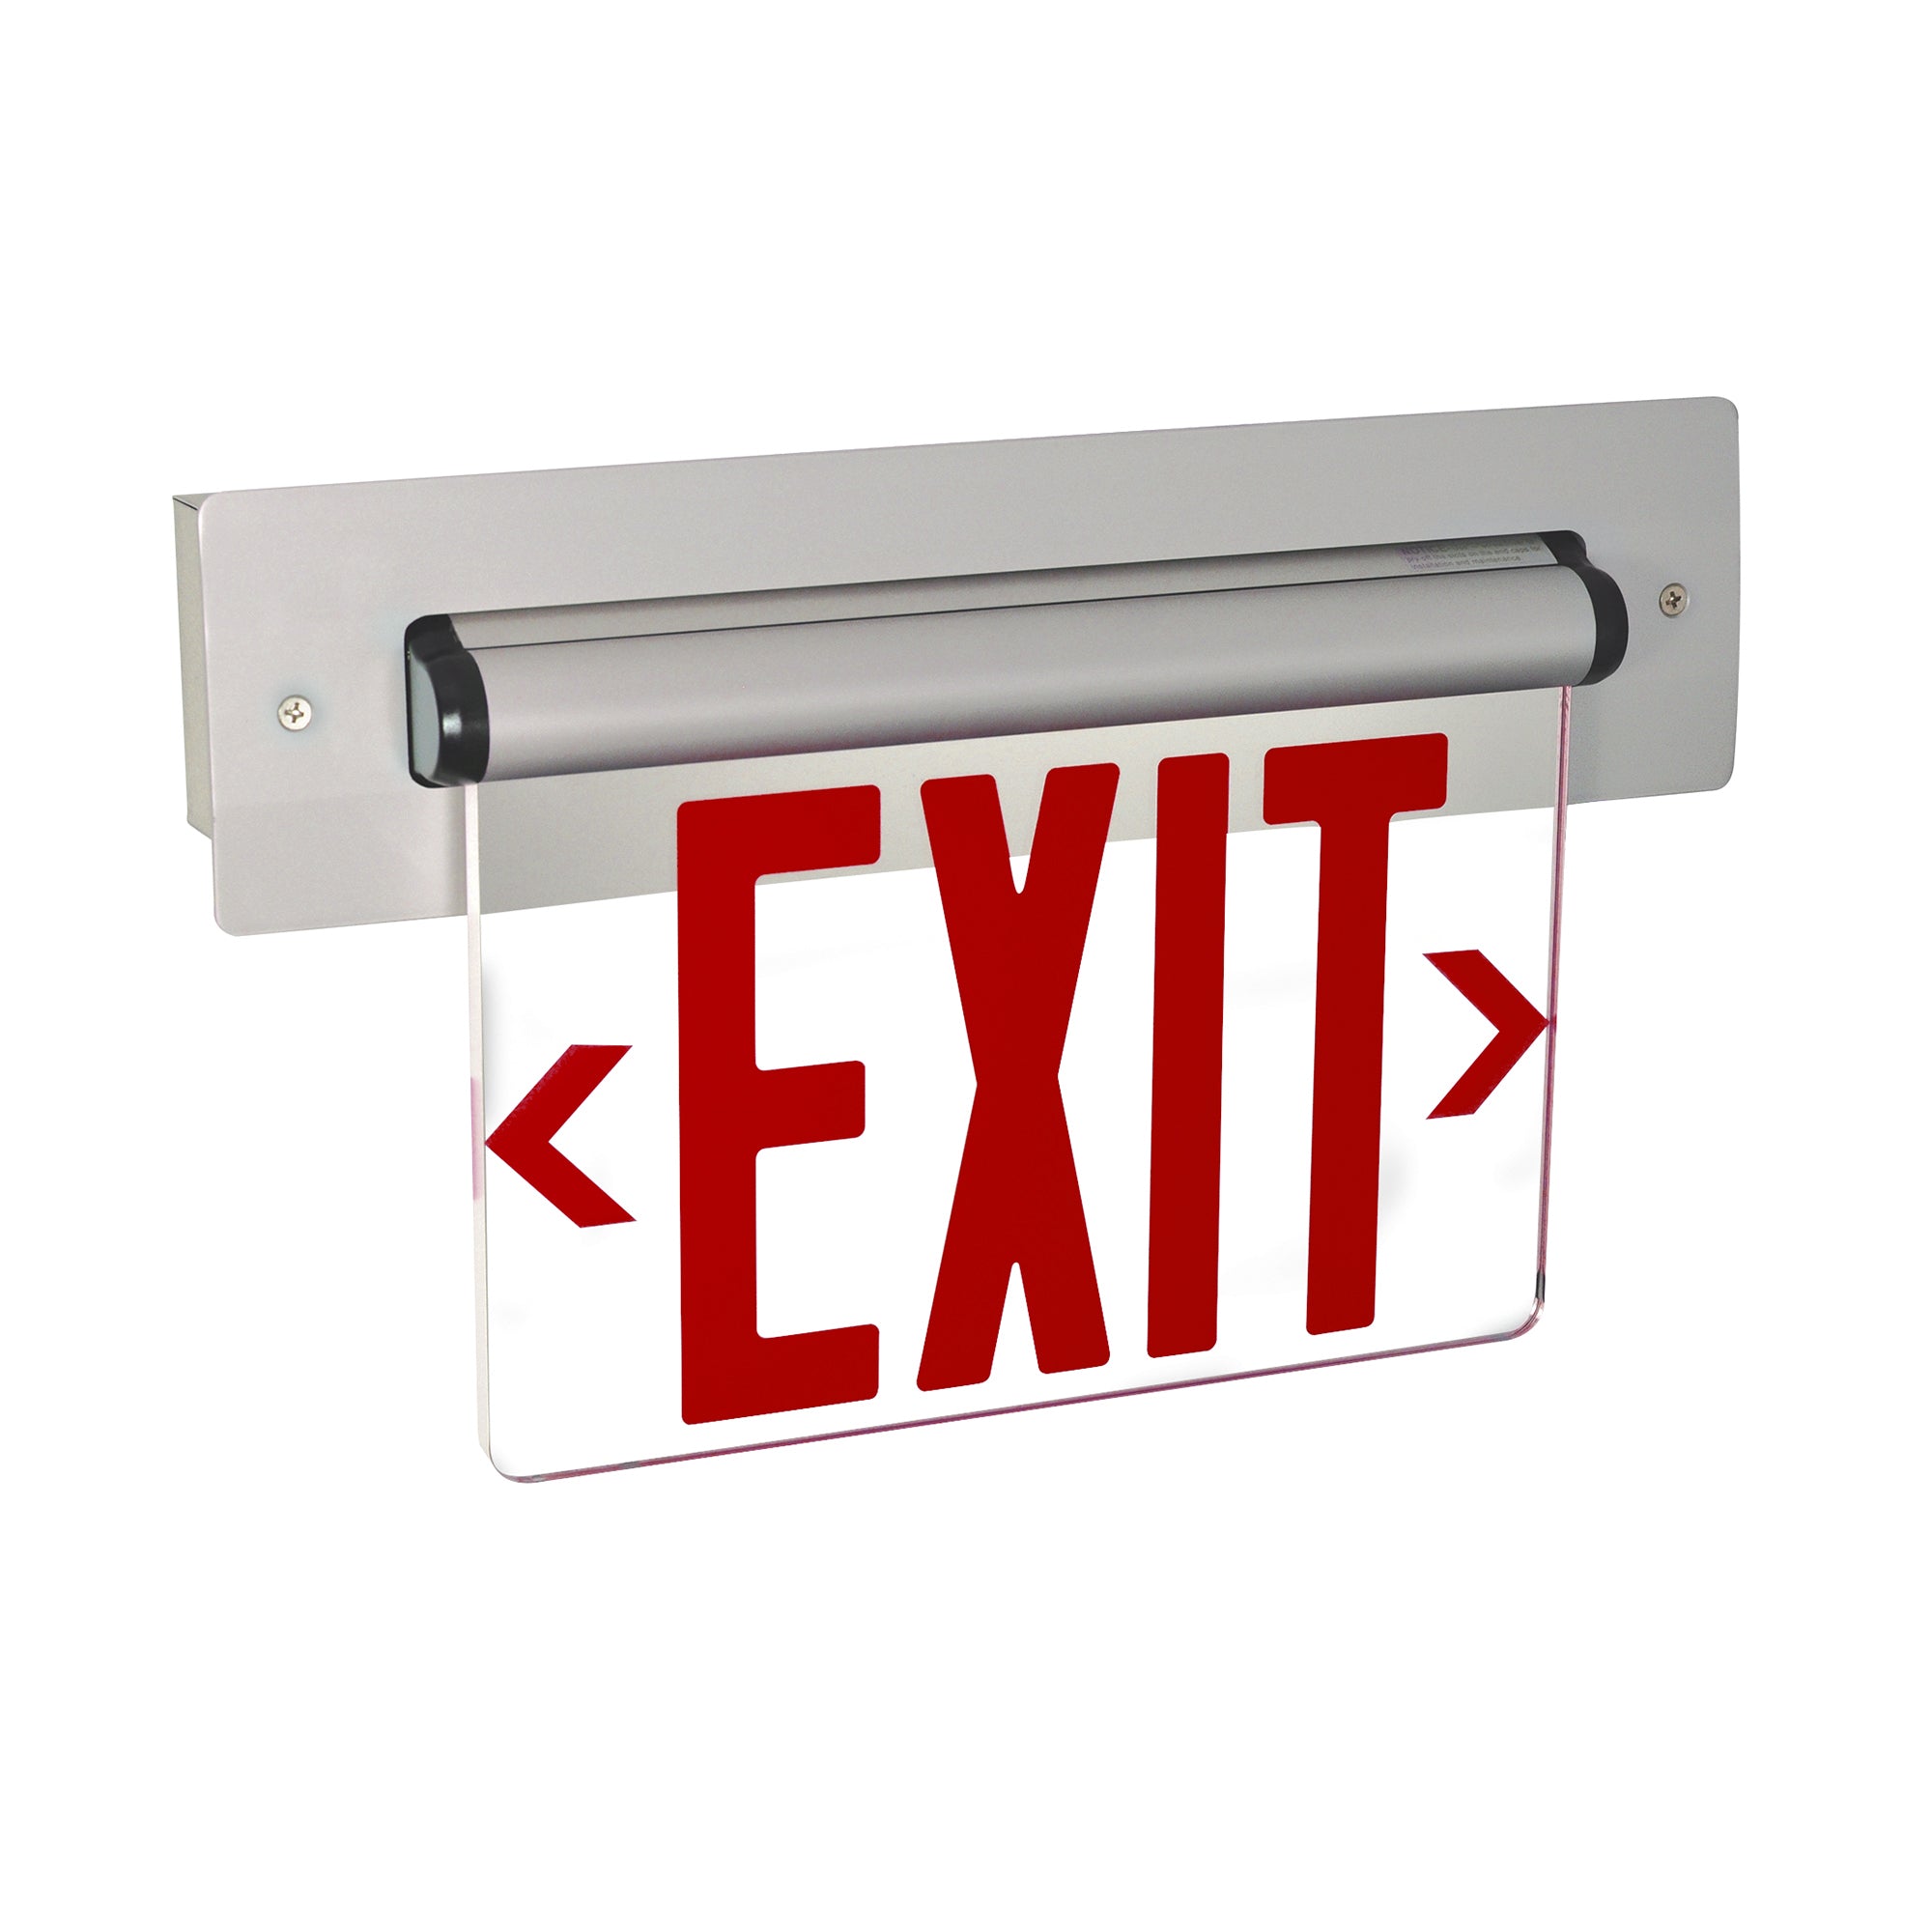 Nora Lighting NX-815-LEDRCW - Exit / Emergency - Recessed Adjustable LED Edge-Lit Exit Sign, Battery Backup, 6 Inch Red Letters, Single Face / Clear Acrylic, White Housing